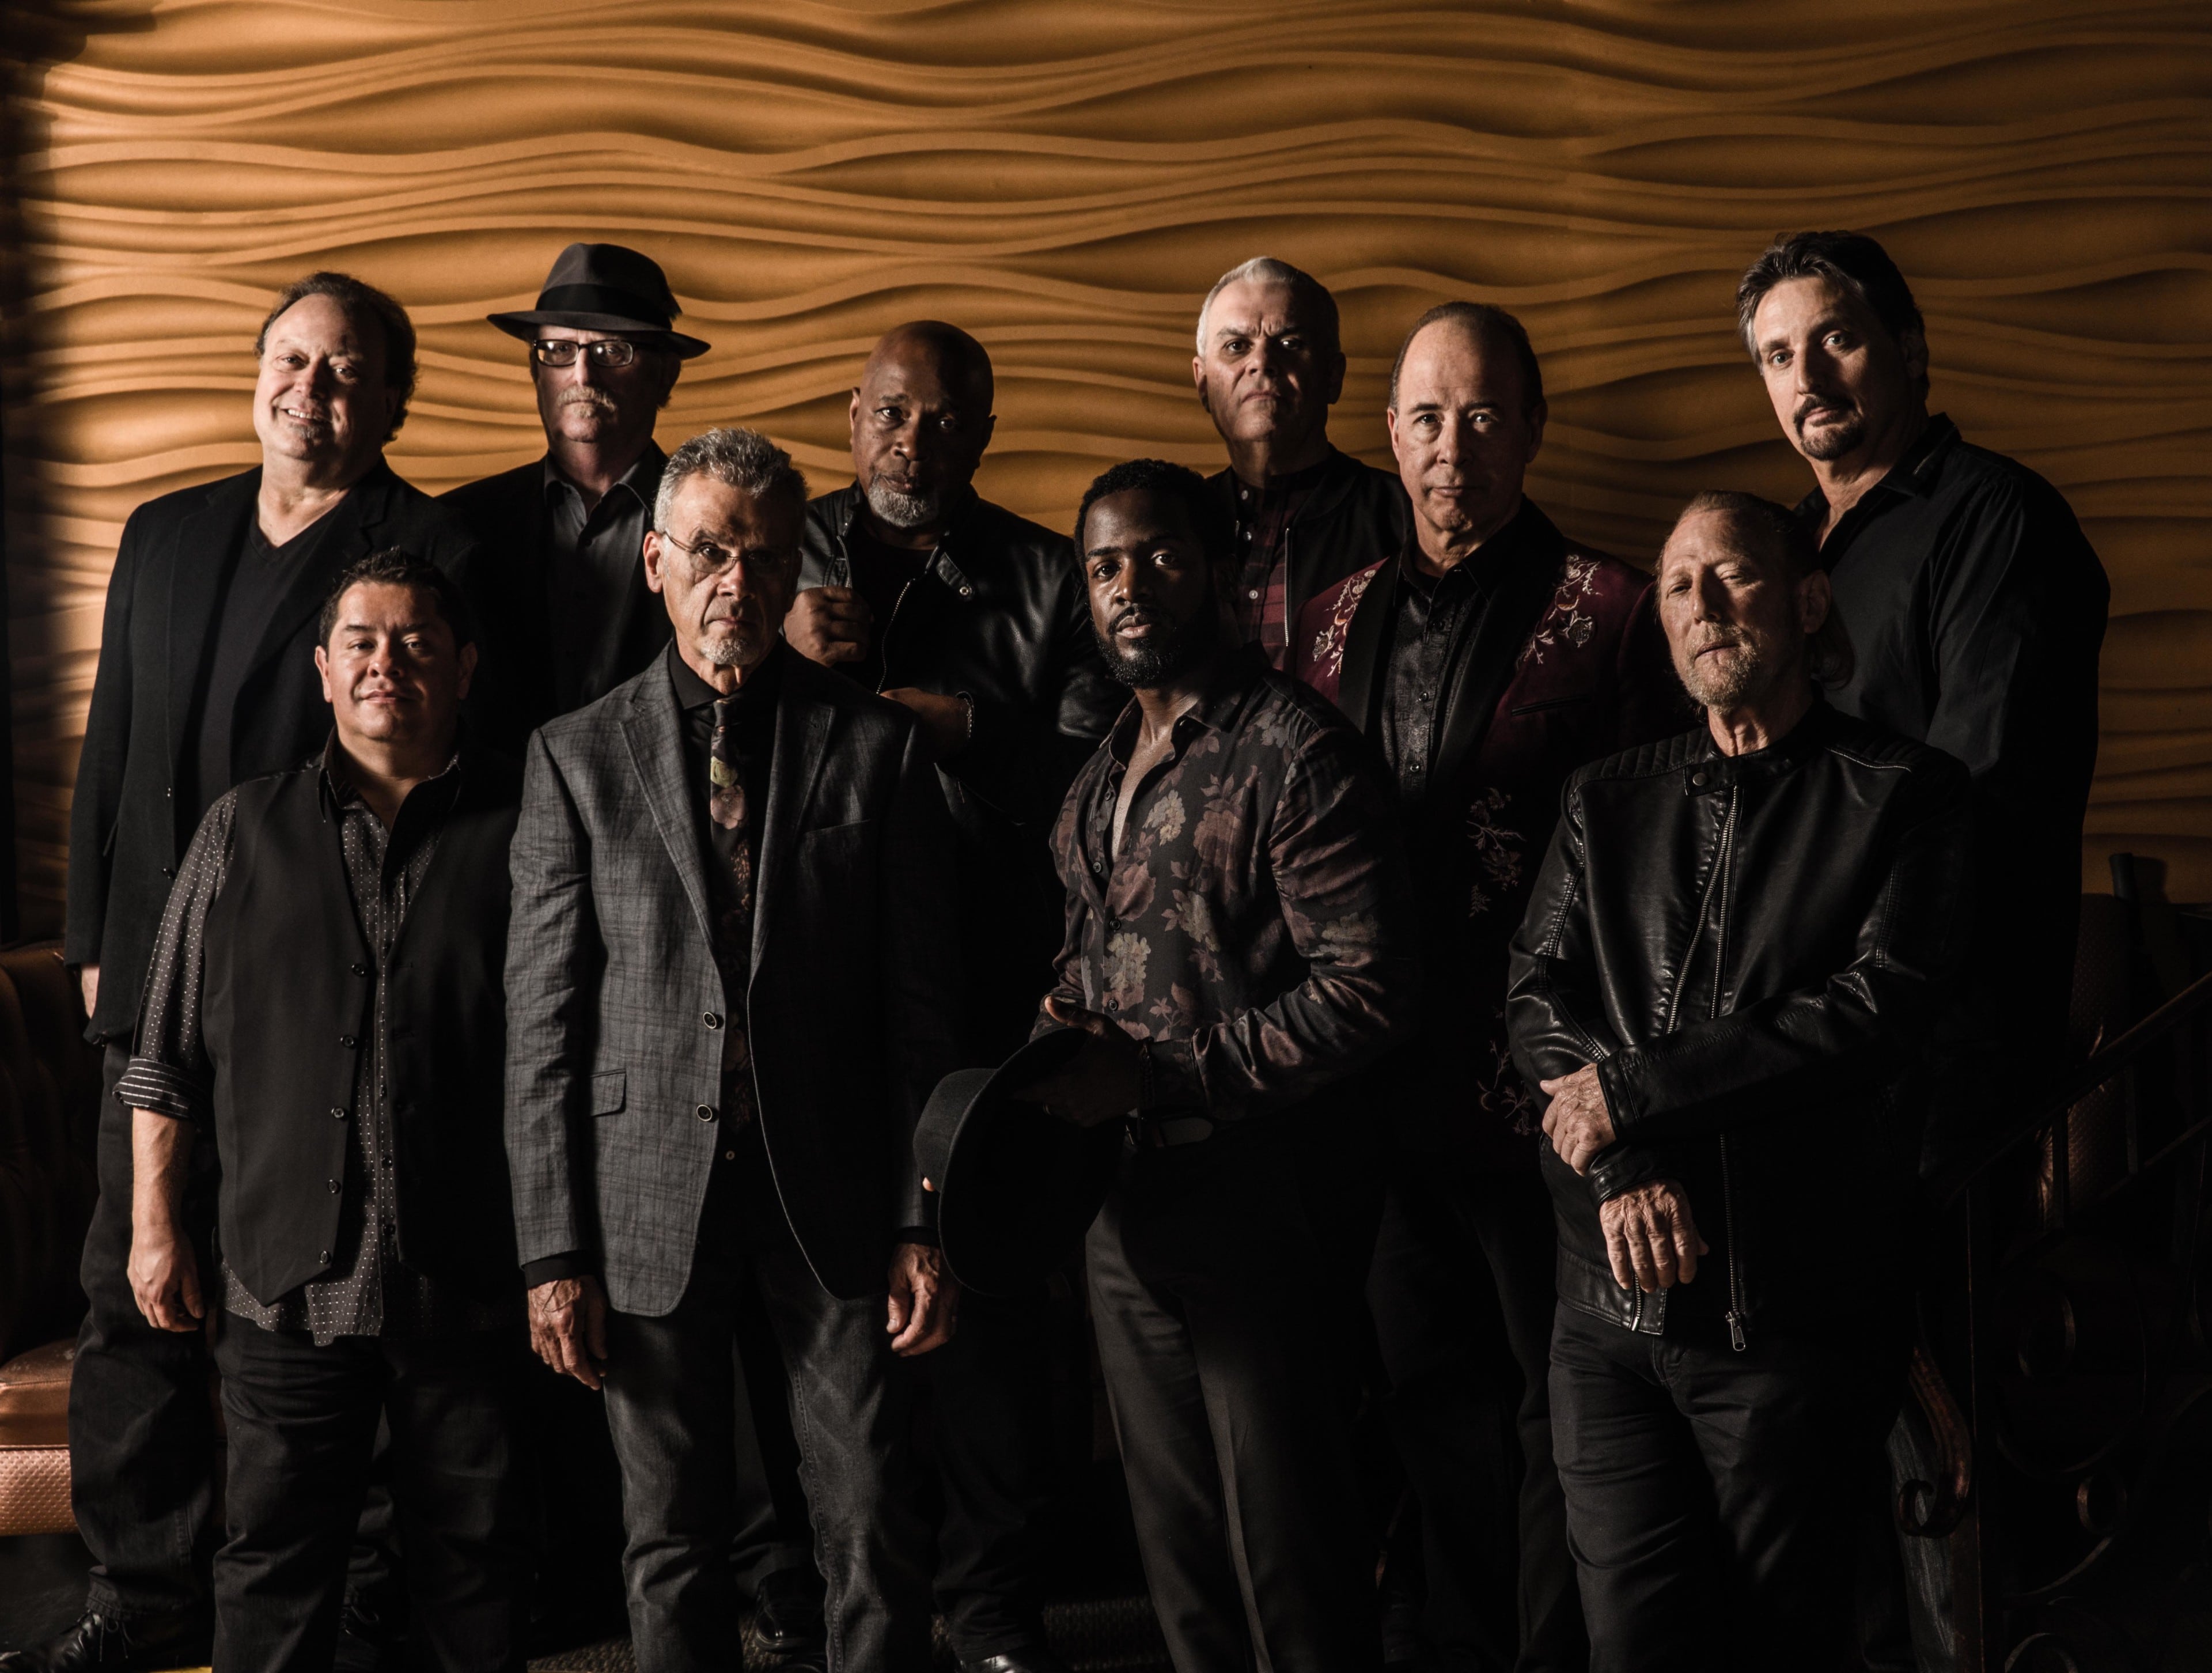 Tower Of Power Share Video For "On The Soul Side Of Town" « American